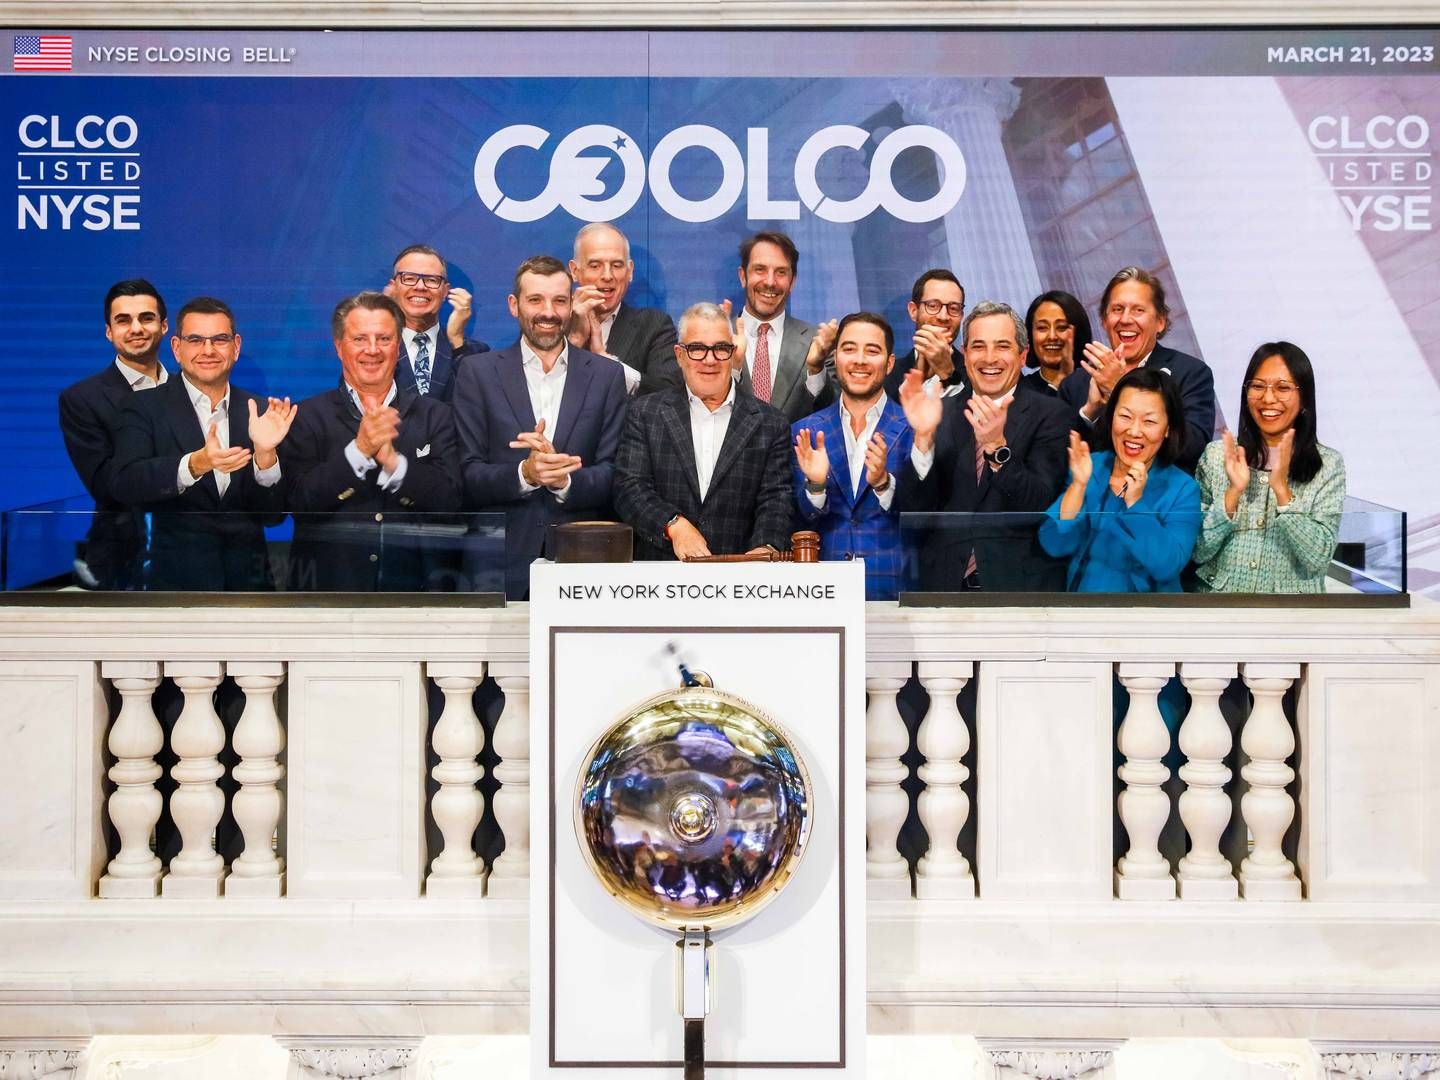 Idan Ofer rings the Closing Bell at the New York Stock Exchange in March this year, marking the IPO of Cool Company. | Foto: Pr-foto